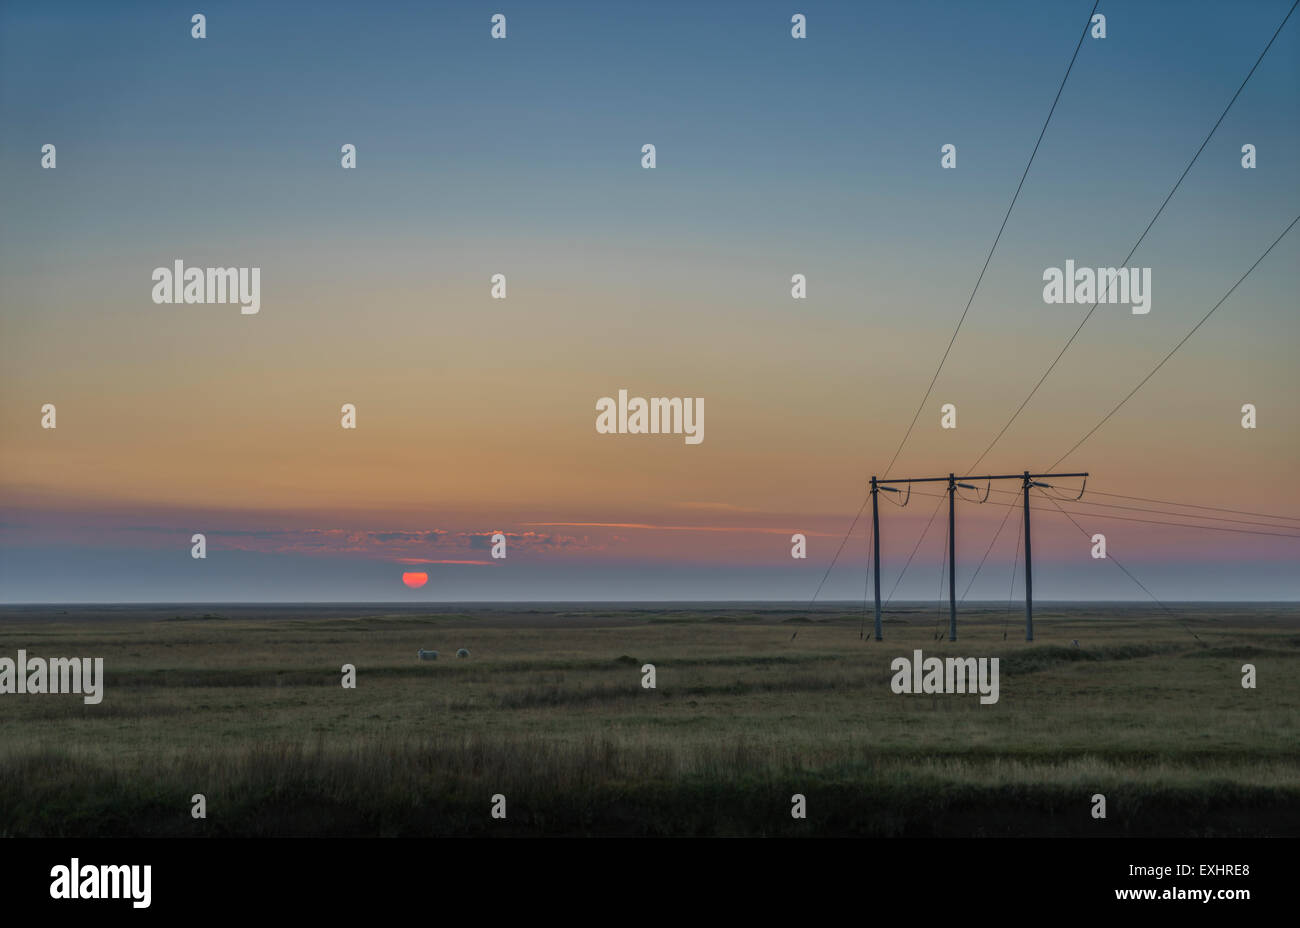 Sunset over farmland with electrical poles and wires, Skeidararsandur outwash plains, Iceland Stock Photo